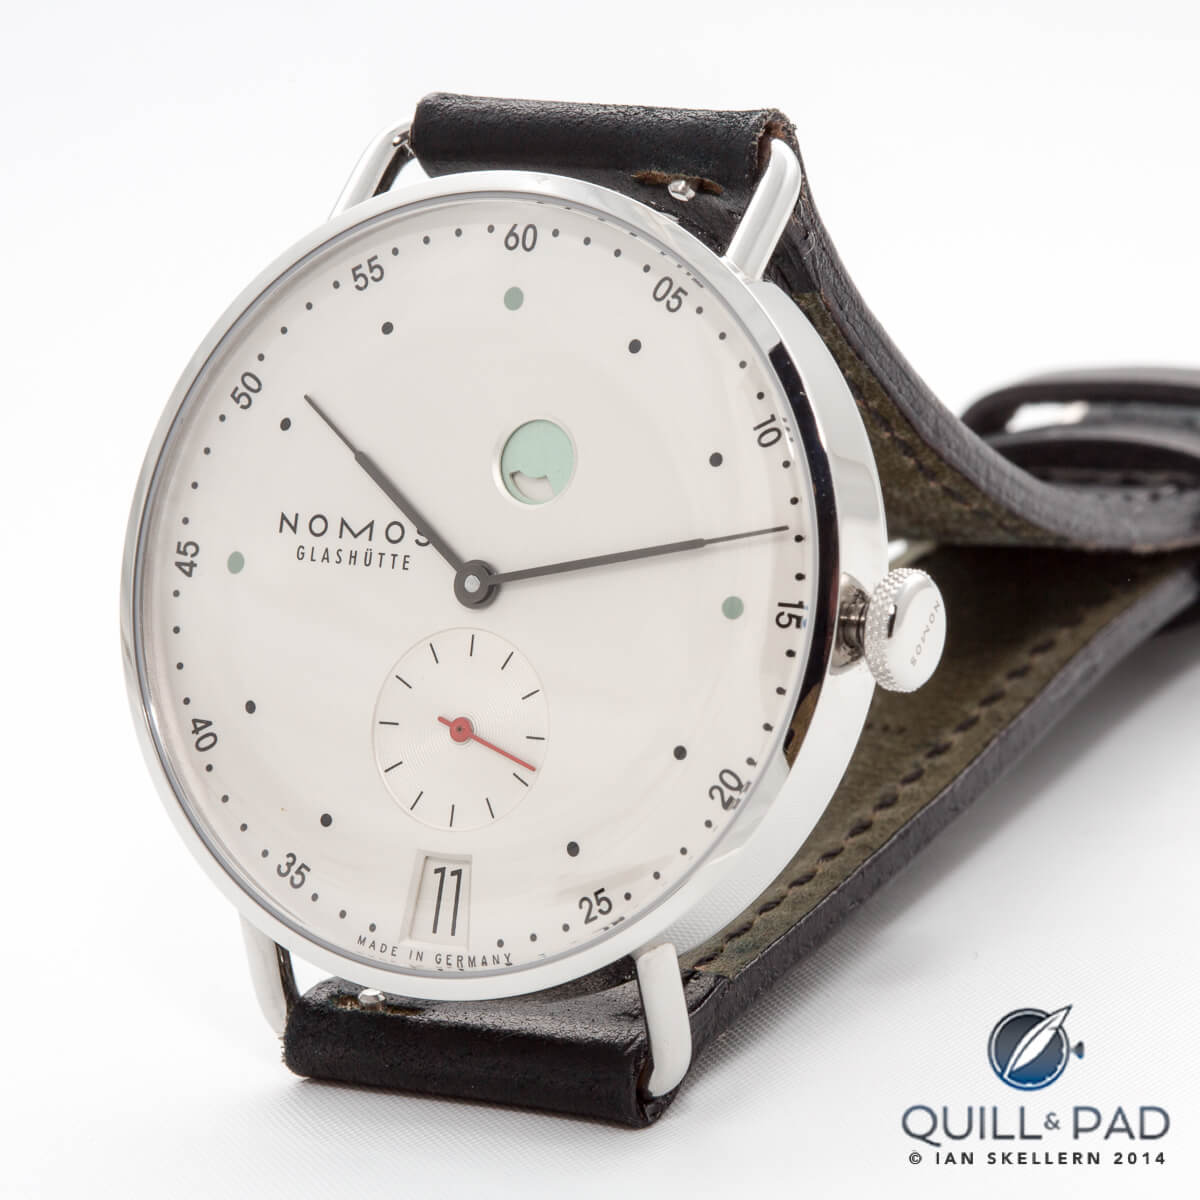 Nomos Metro featuring in-house movement with in-house Swing System escapement